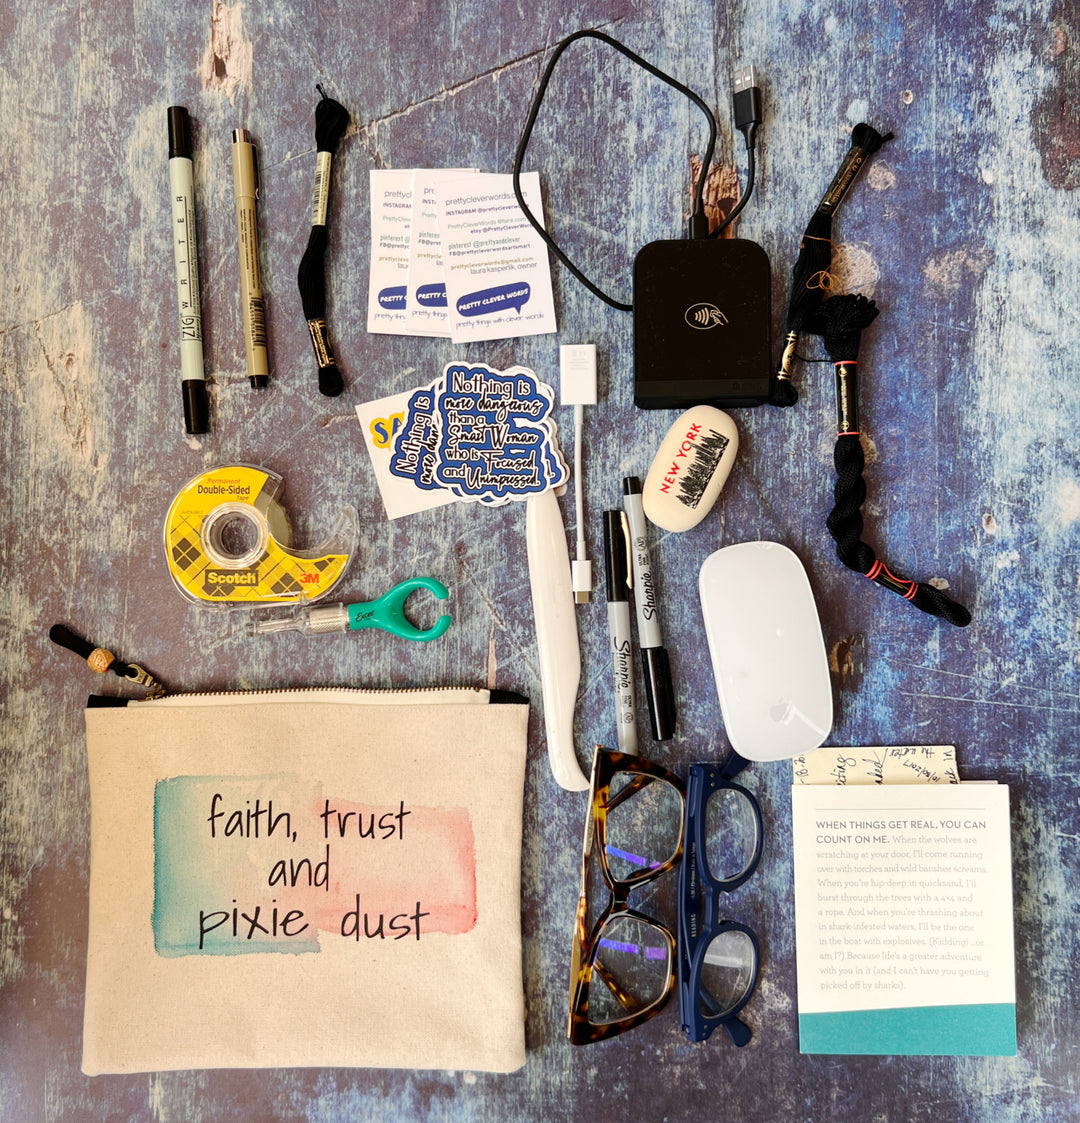 a canvas zip bag flat lay photo, with various office tools and products, designed to show how many items can fit into the bag.